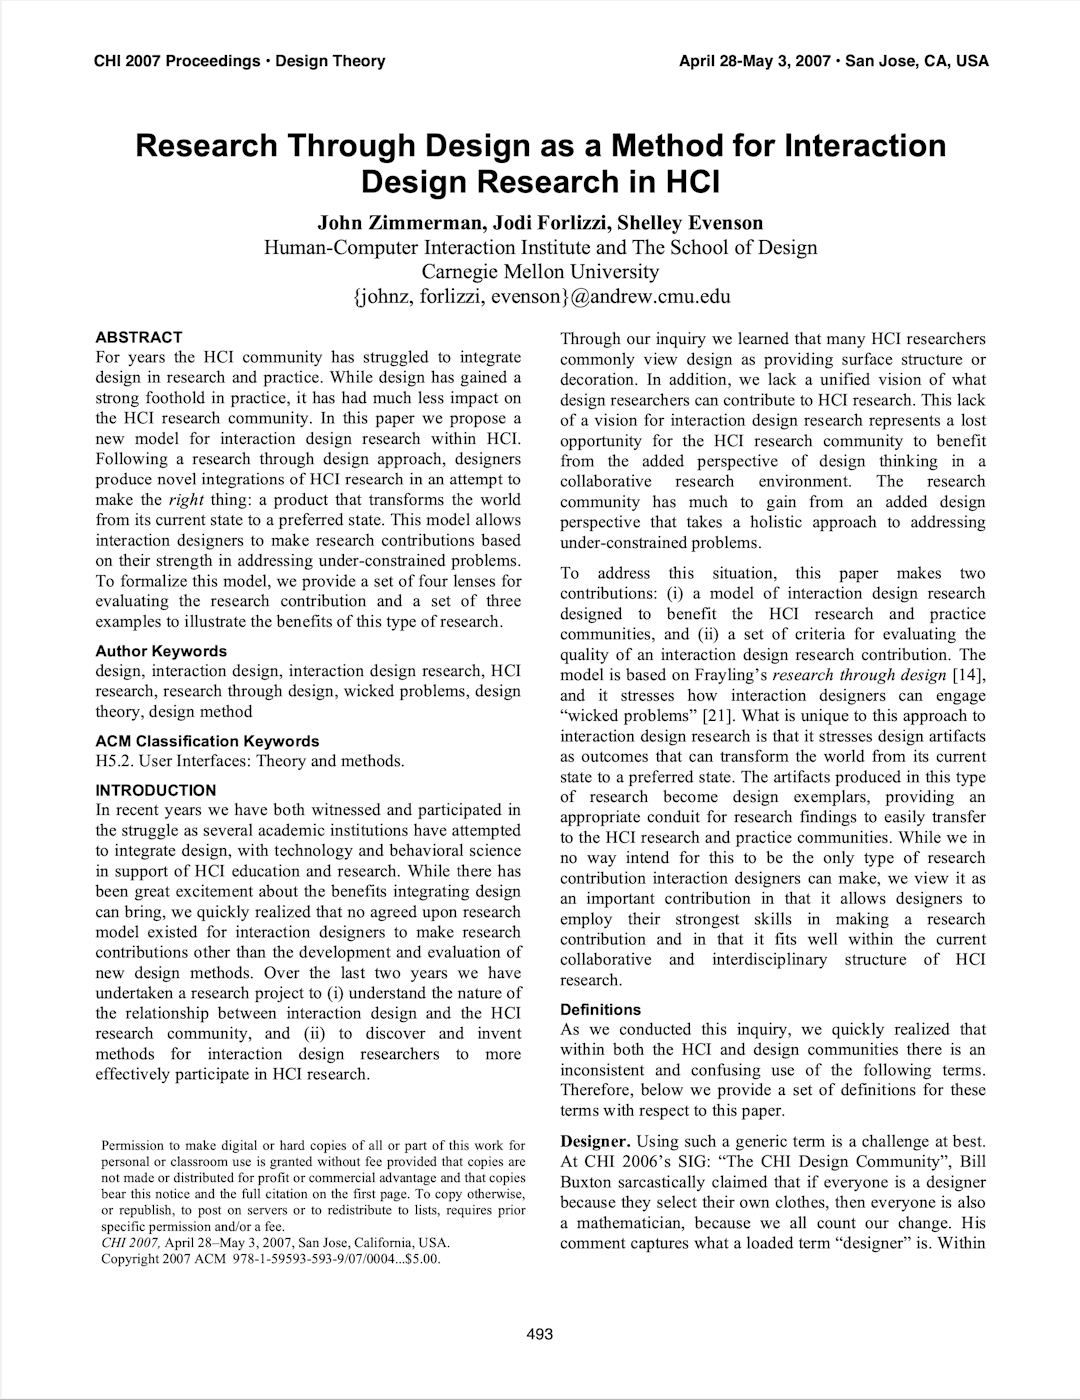 Research through Design as a Method for Interaction Design Research in HCI